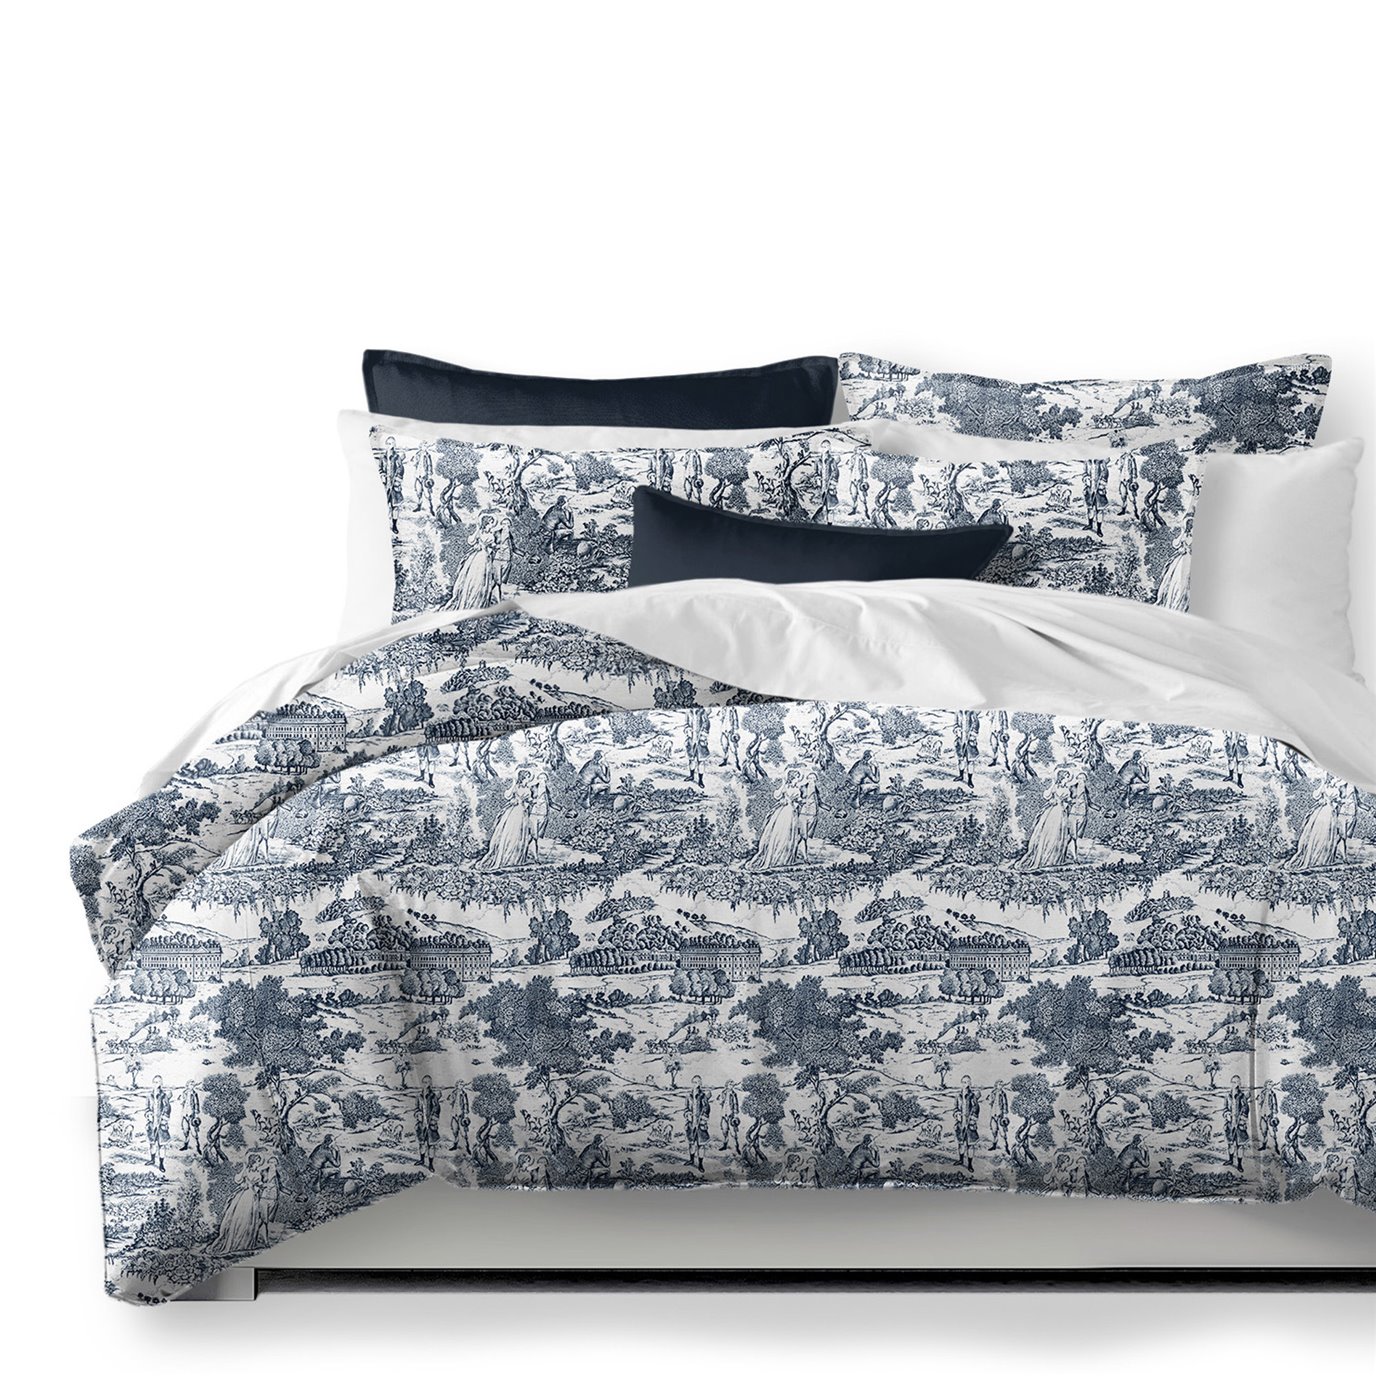 Beau Toile Blue Comforter and Pillow Sham(s) Set - Size Twin